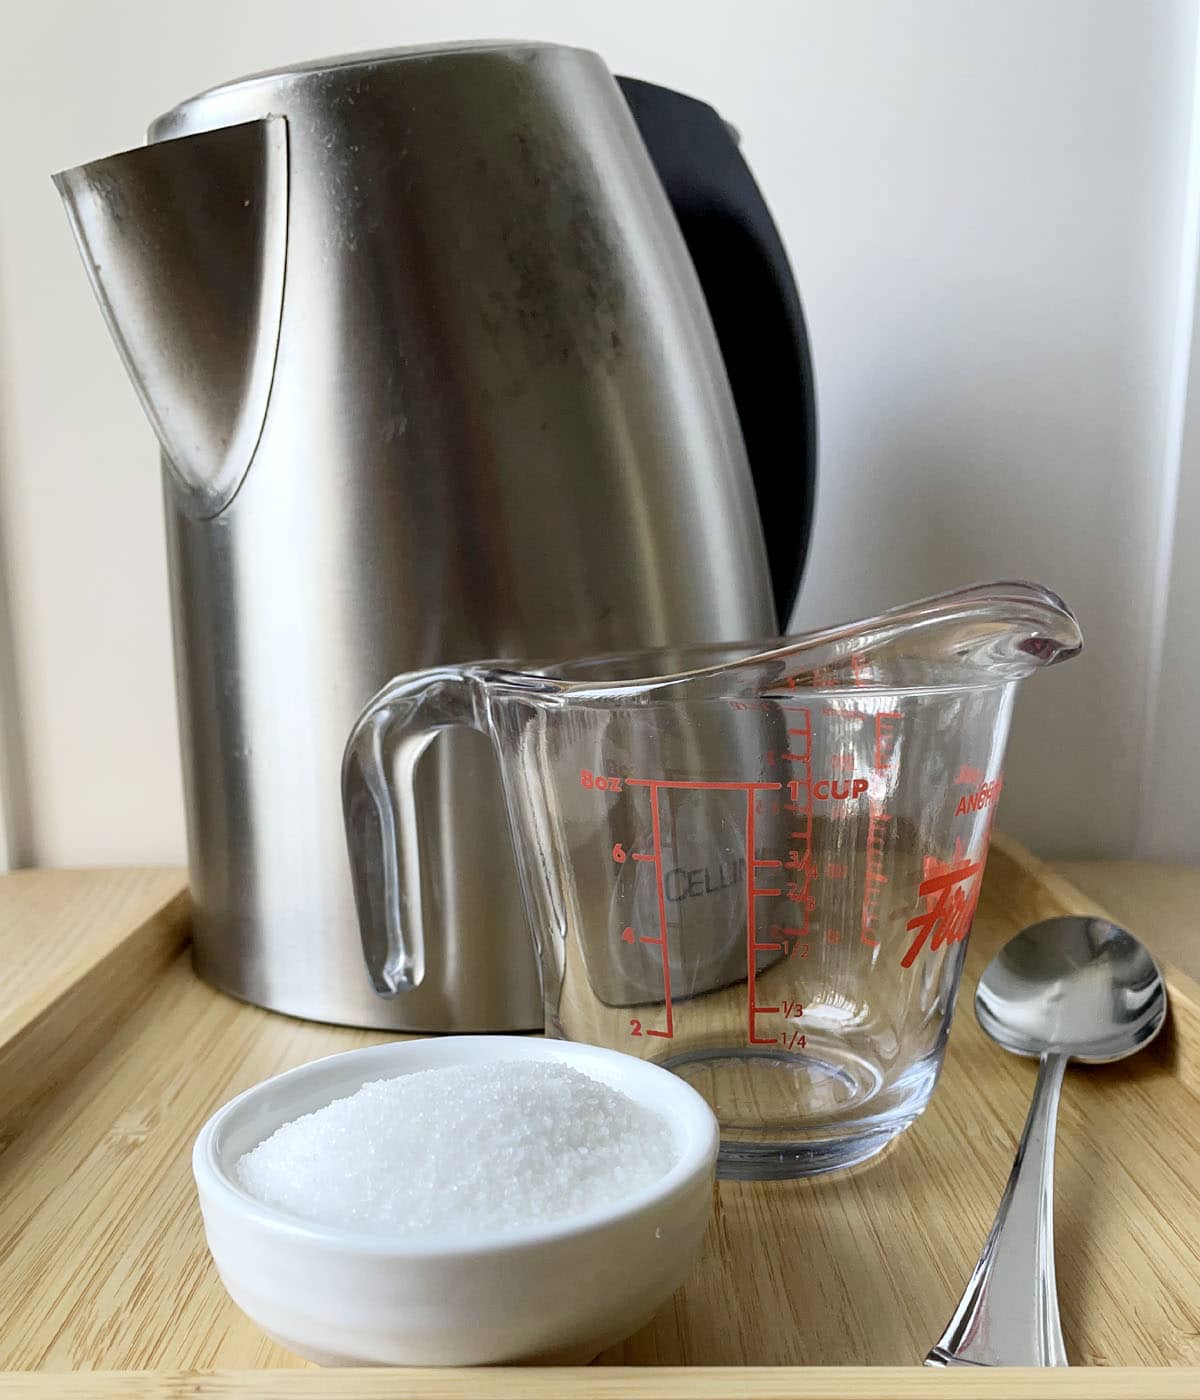 A metal kettle, an empty glass measuring cup, a spoon, and a white round dish containing sugar.